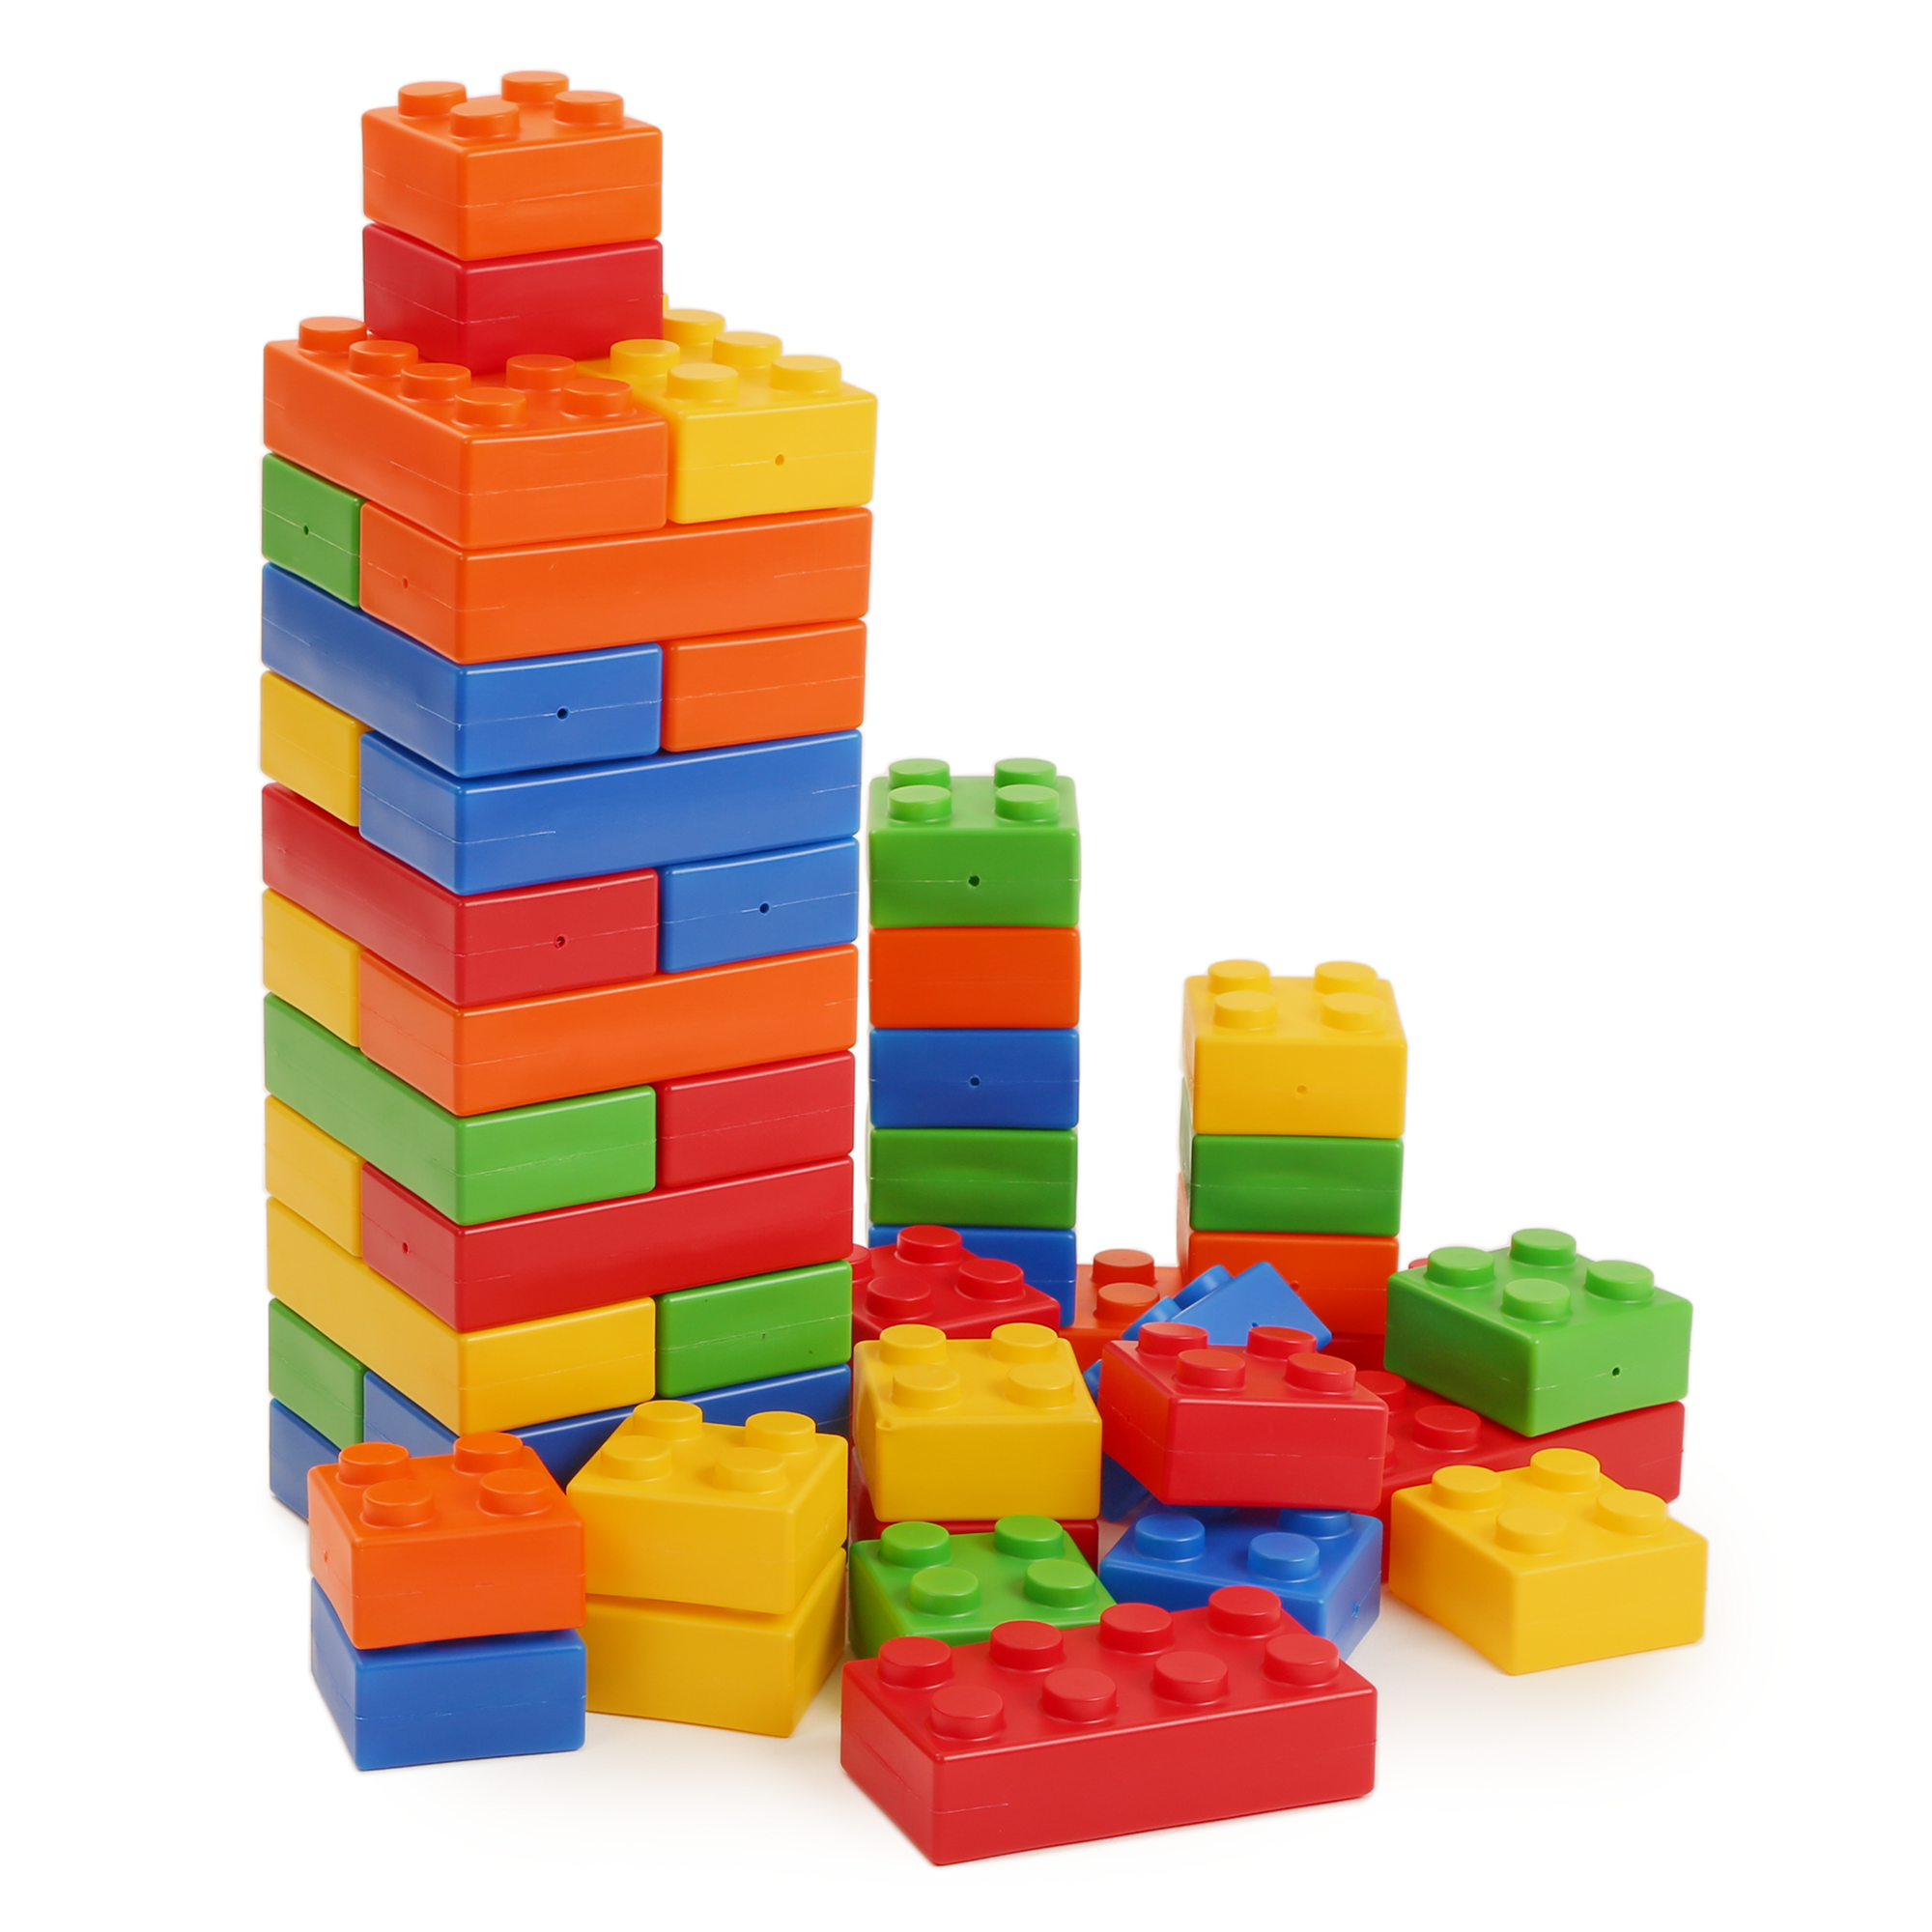 Open Ended Toys and Building Blocks